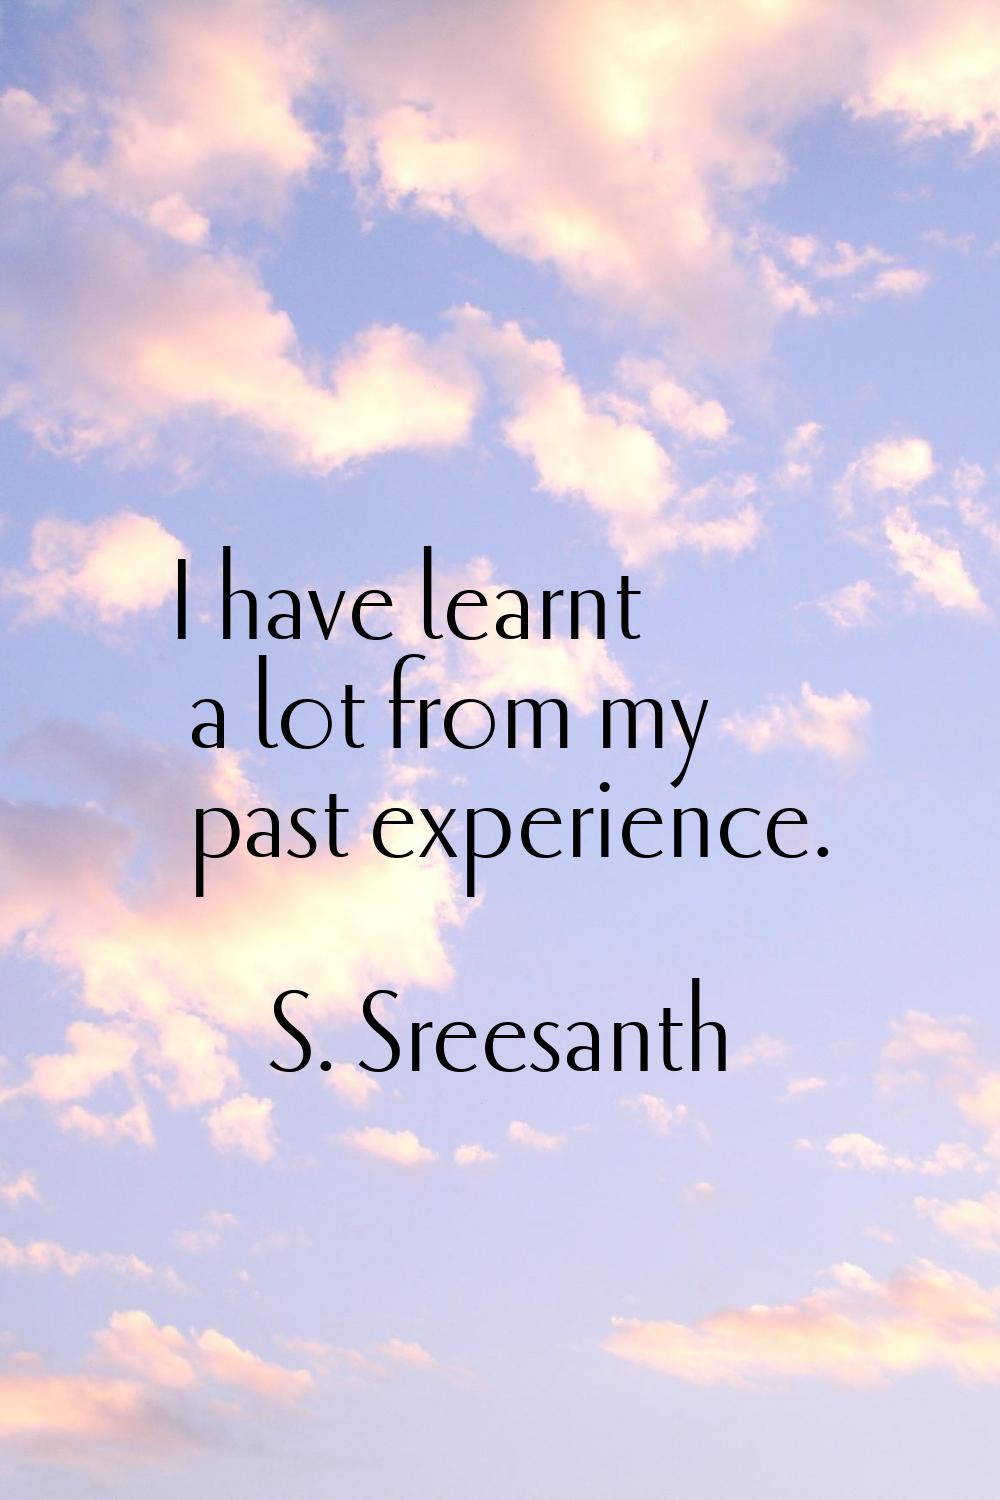 I have learnt a lot from my past experience.